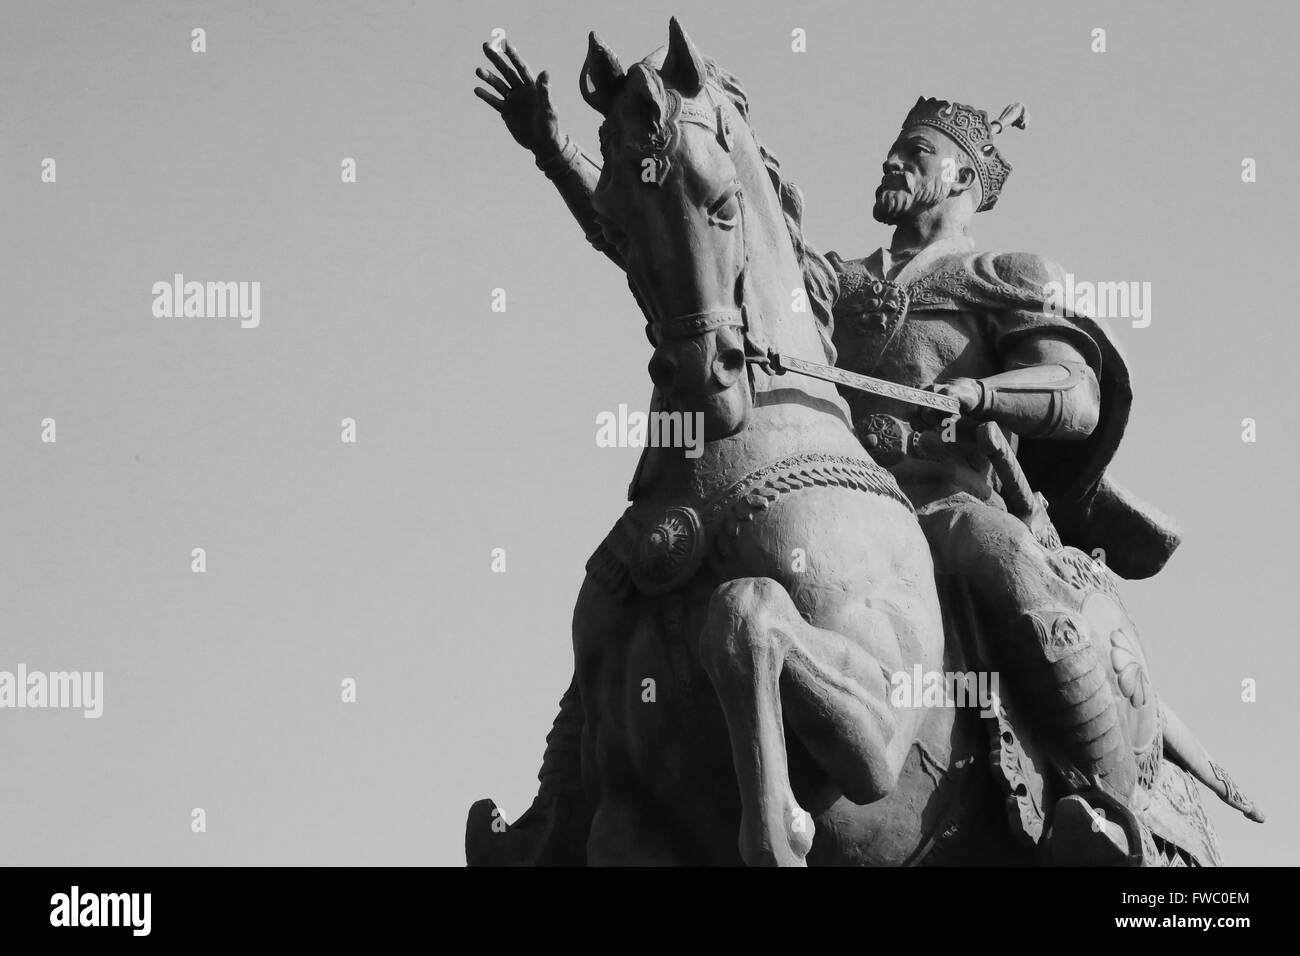 A statue of Amir Temur (Tamerlane) stands in the center of the square named after him.  Tashkent, Uzbekistan. Stock Photo